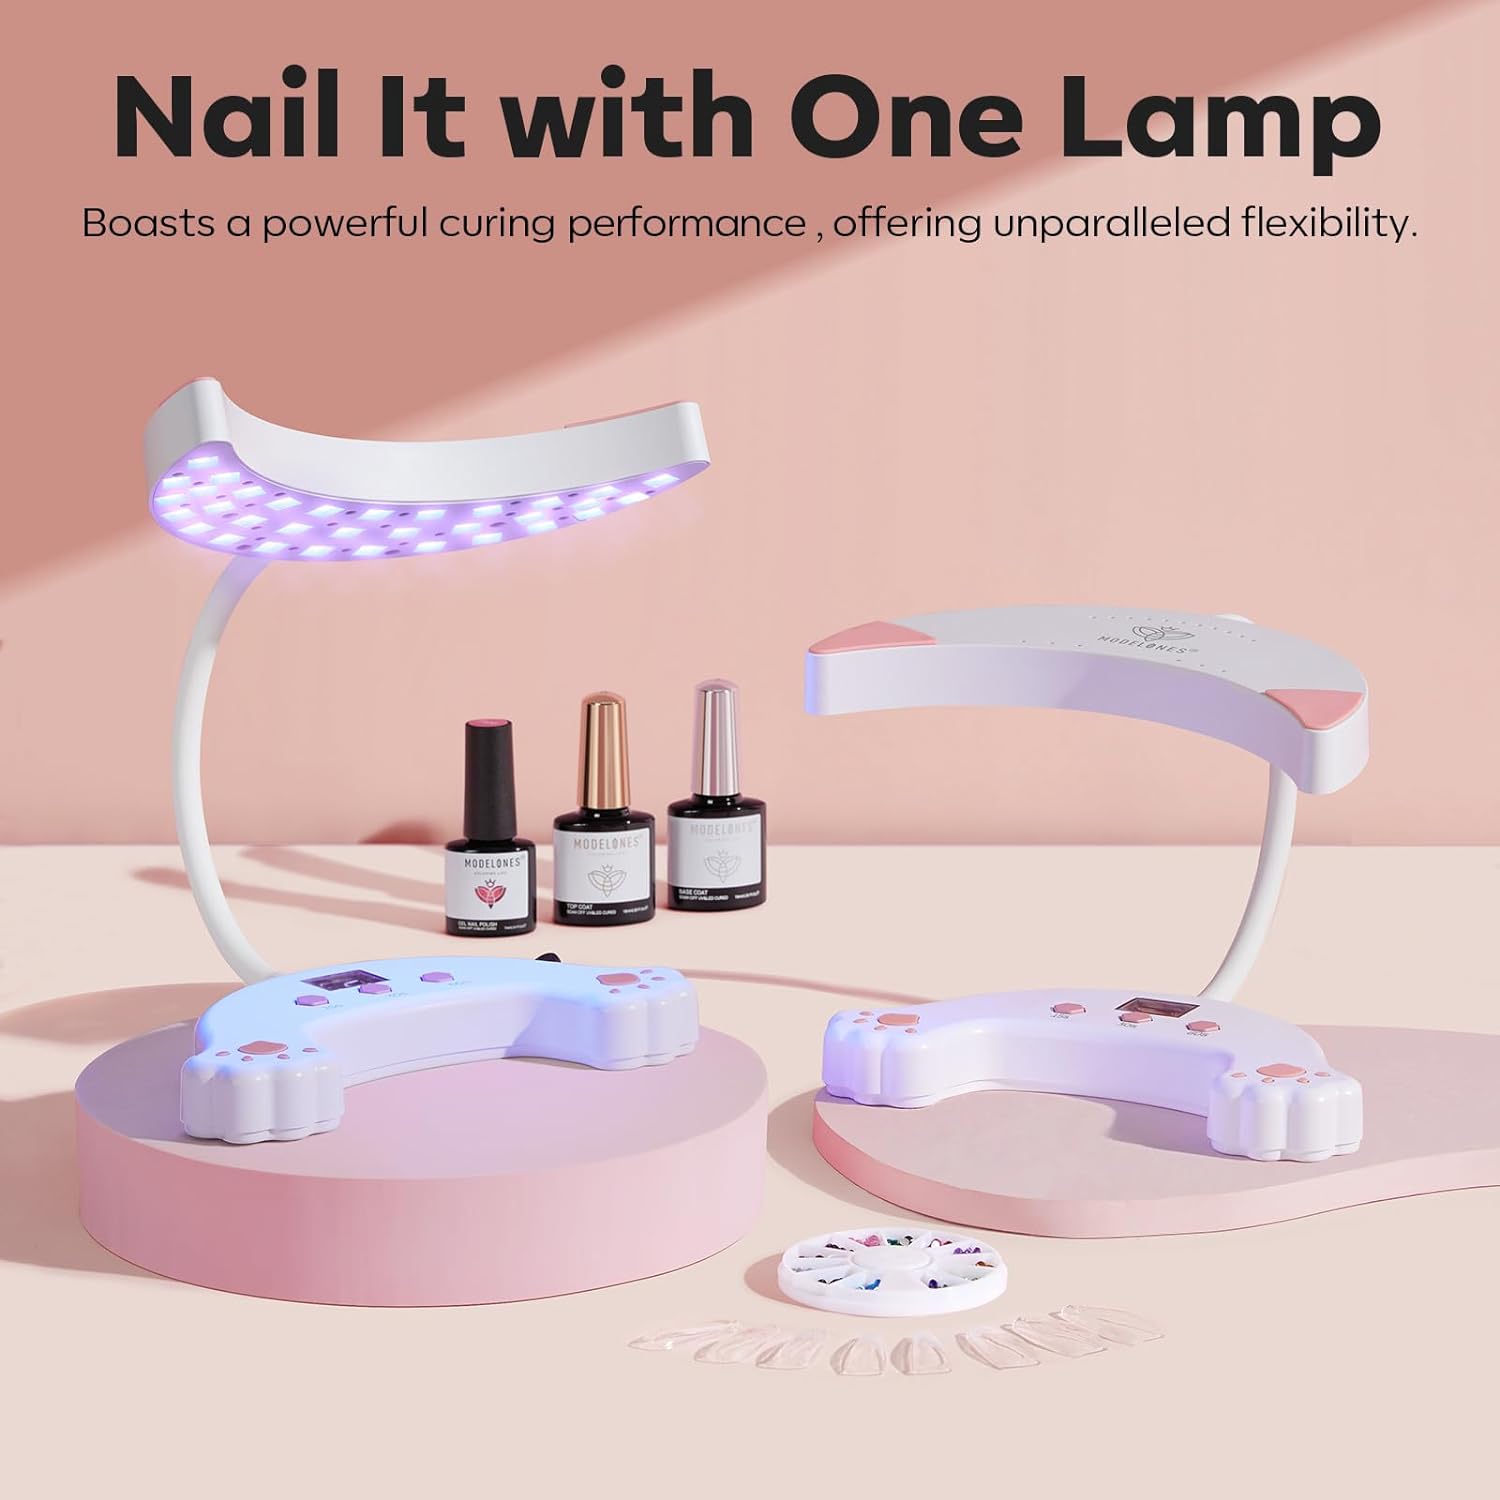 Best UV Light Lamp for Nails, UV Lamp for Nails, 48W Nail Dryer for Gel Nail Polish, Cute Meow Nail Light with 3 Timers, USB LED Nail Lamp for Fast Curing